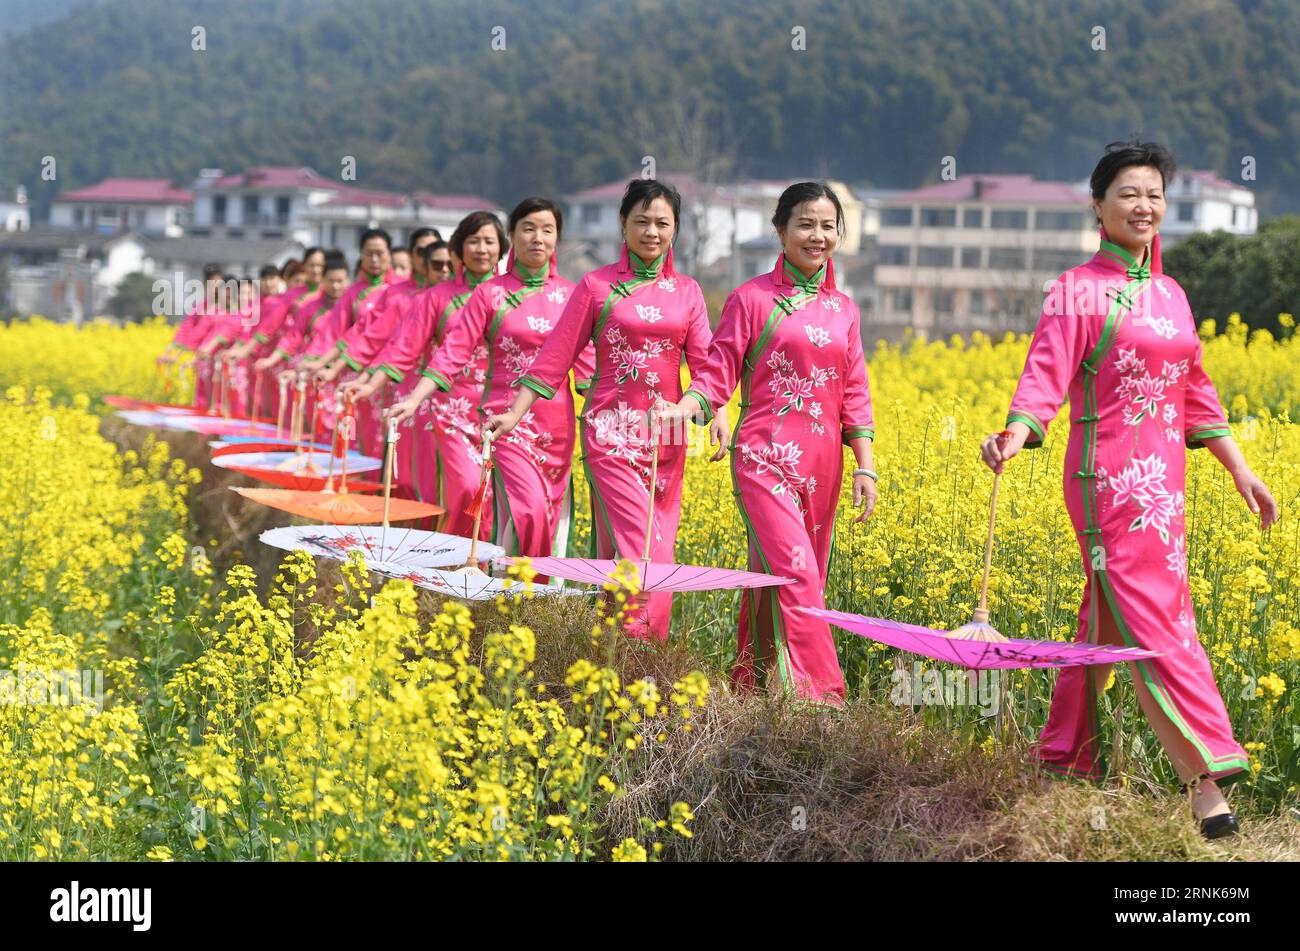 https://c8.alamy.com/comp/2RNK69M/170308-nanchang-march-8-2017-women-present-qipao-a-traditional-chinese-dress-during-a-qipao-show-at-a-cole-flower-field-in-nanchang-capital-of-east-china-s-jiangxi-province-march-8-2017-zyd-china-nanchang-qipao-show-cn-wanxxiang-publicationxnotxinxchn-nanchang-march-8-2017-women-present-qipao-a-traditional-chinese-dress-during-a-qipao-show-at-a-cole-flower-field-in-nanchang-capital-of-east-china-s-jiangxi-province-march-8-2017-zyd-china-nanchang-qipao-show-cn-wanxxiang-publicationxnotxinxchn-2RNK69M.jpg